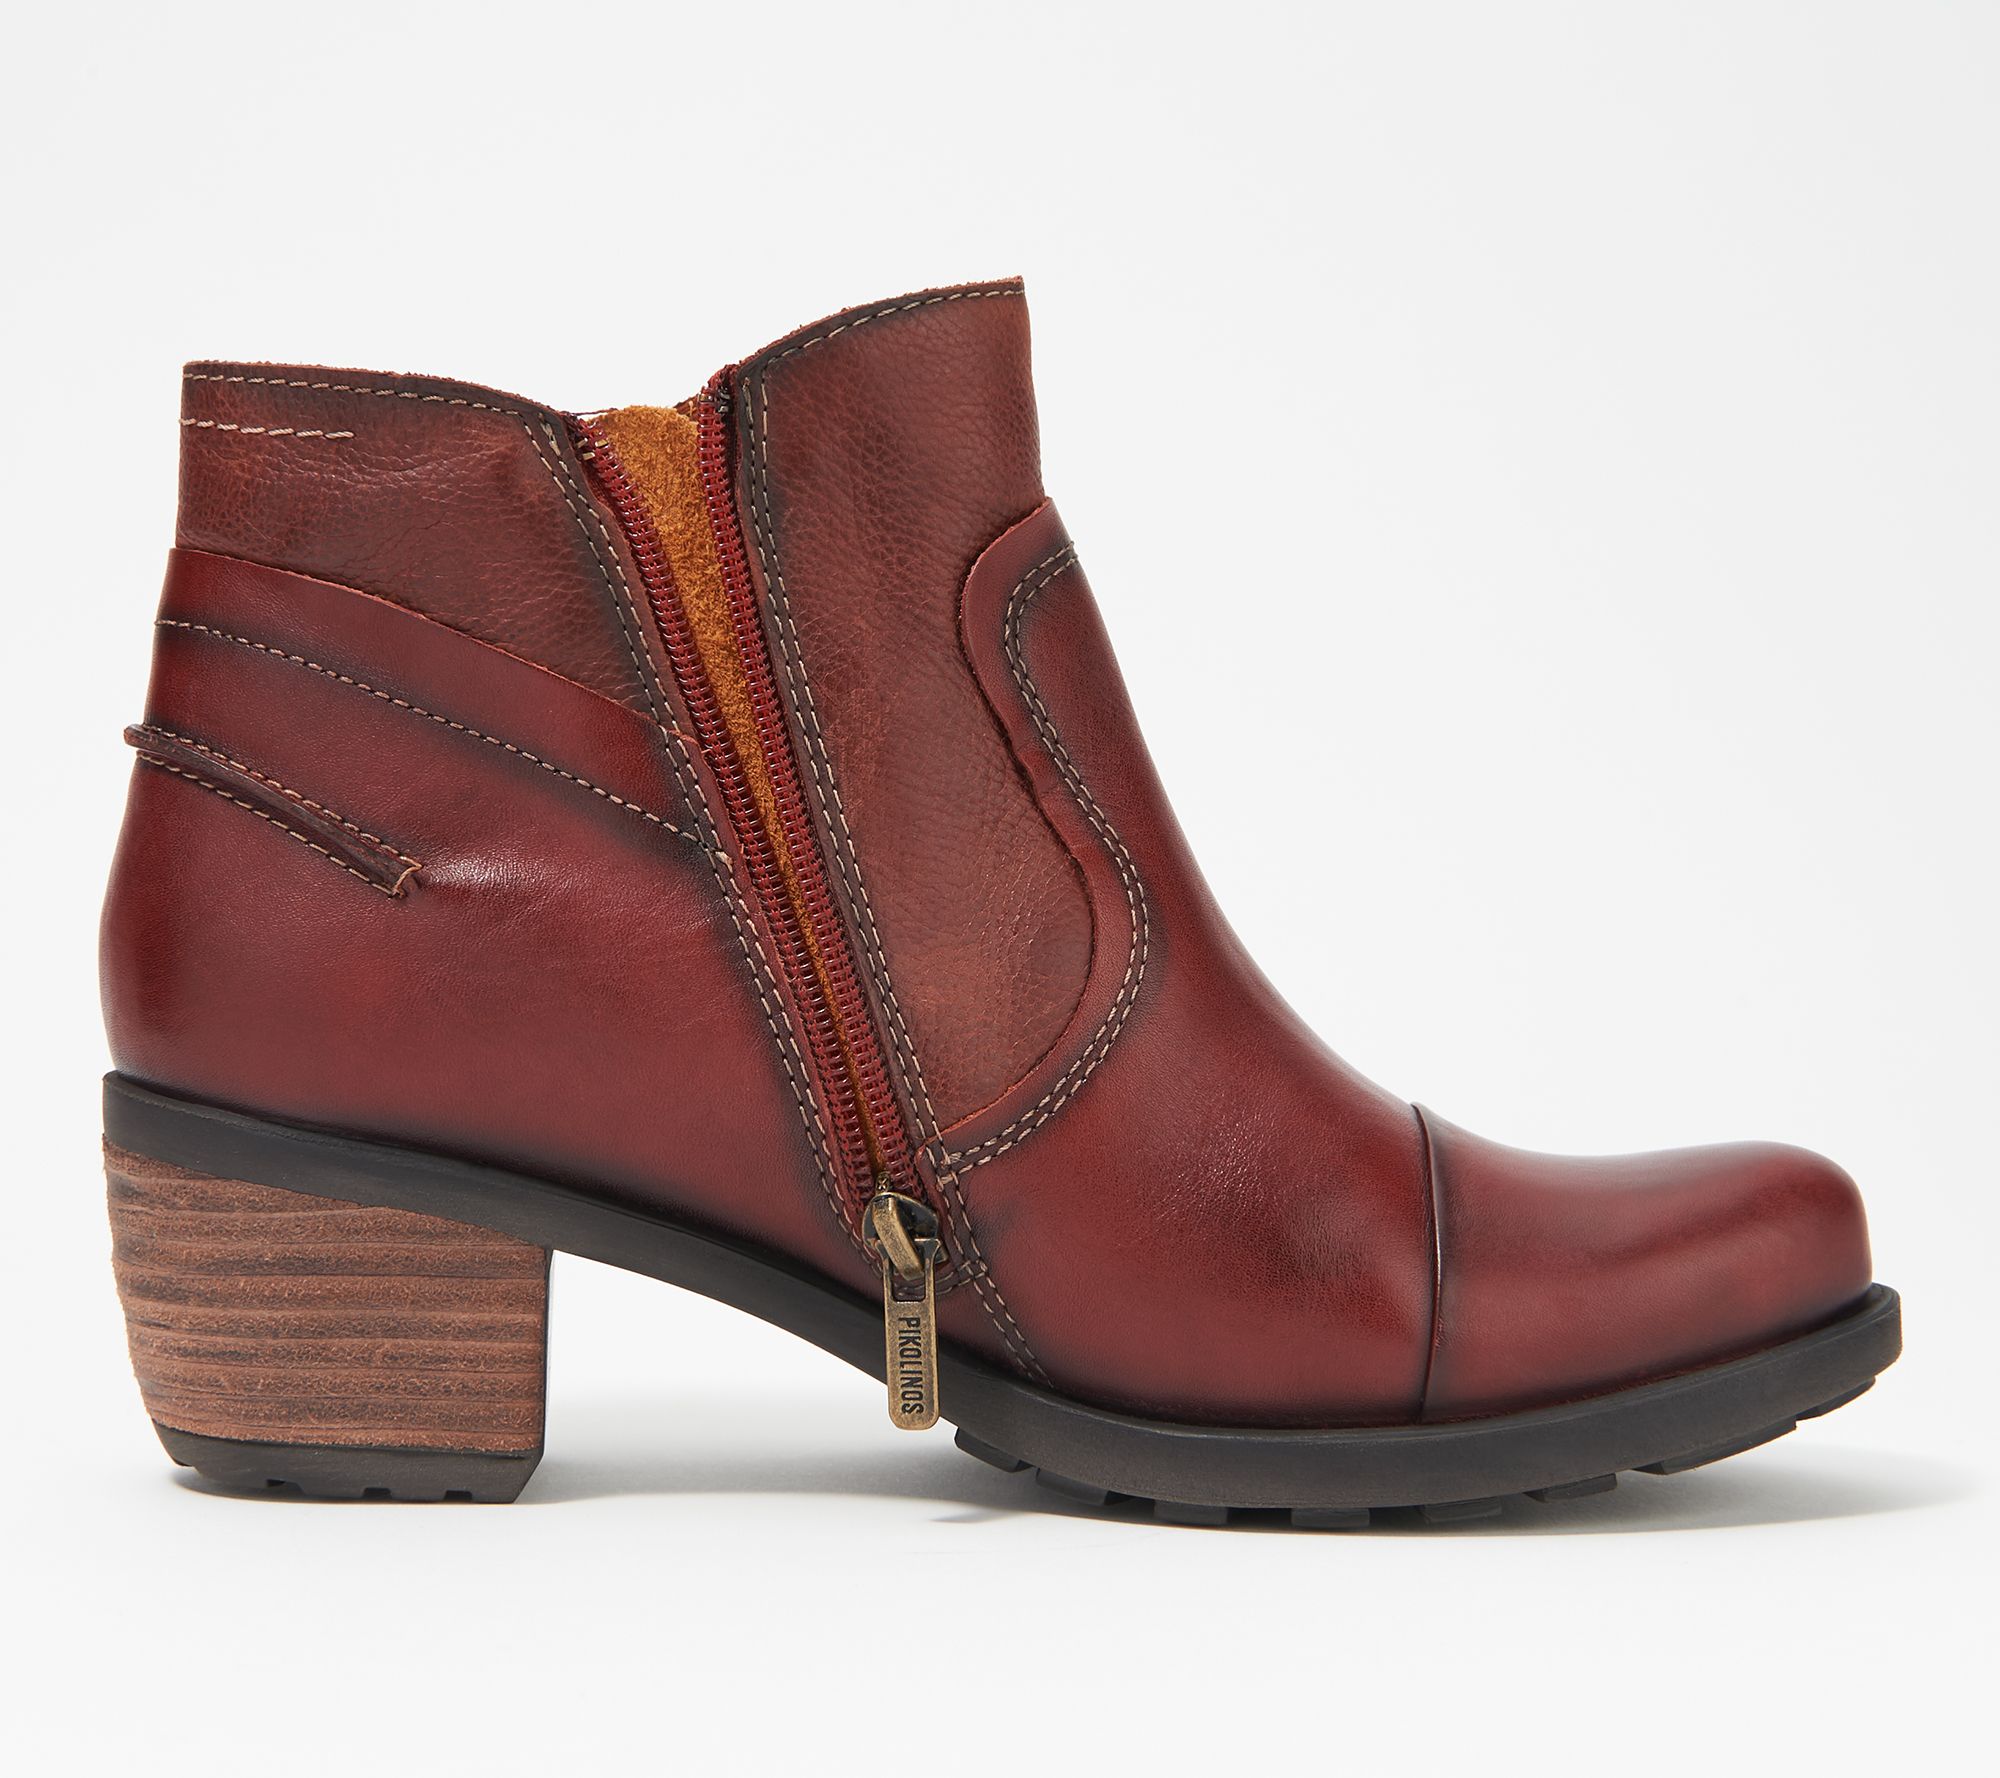 Pikolinos Leather Side Zip Ankle Boots - QVC.com